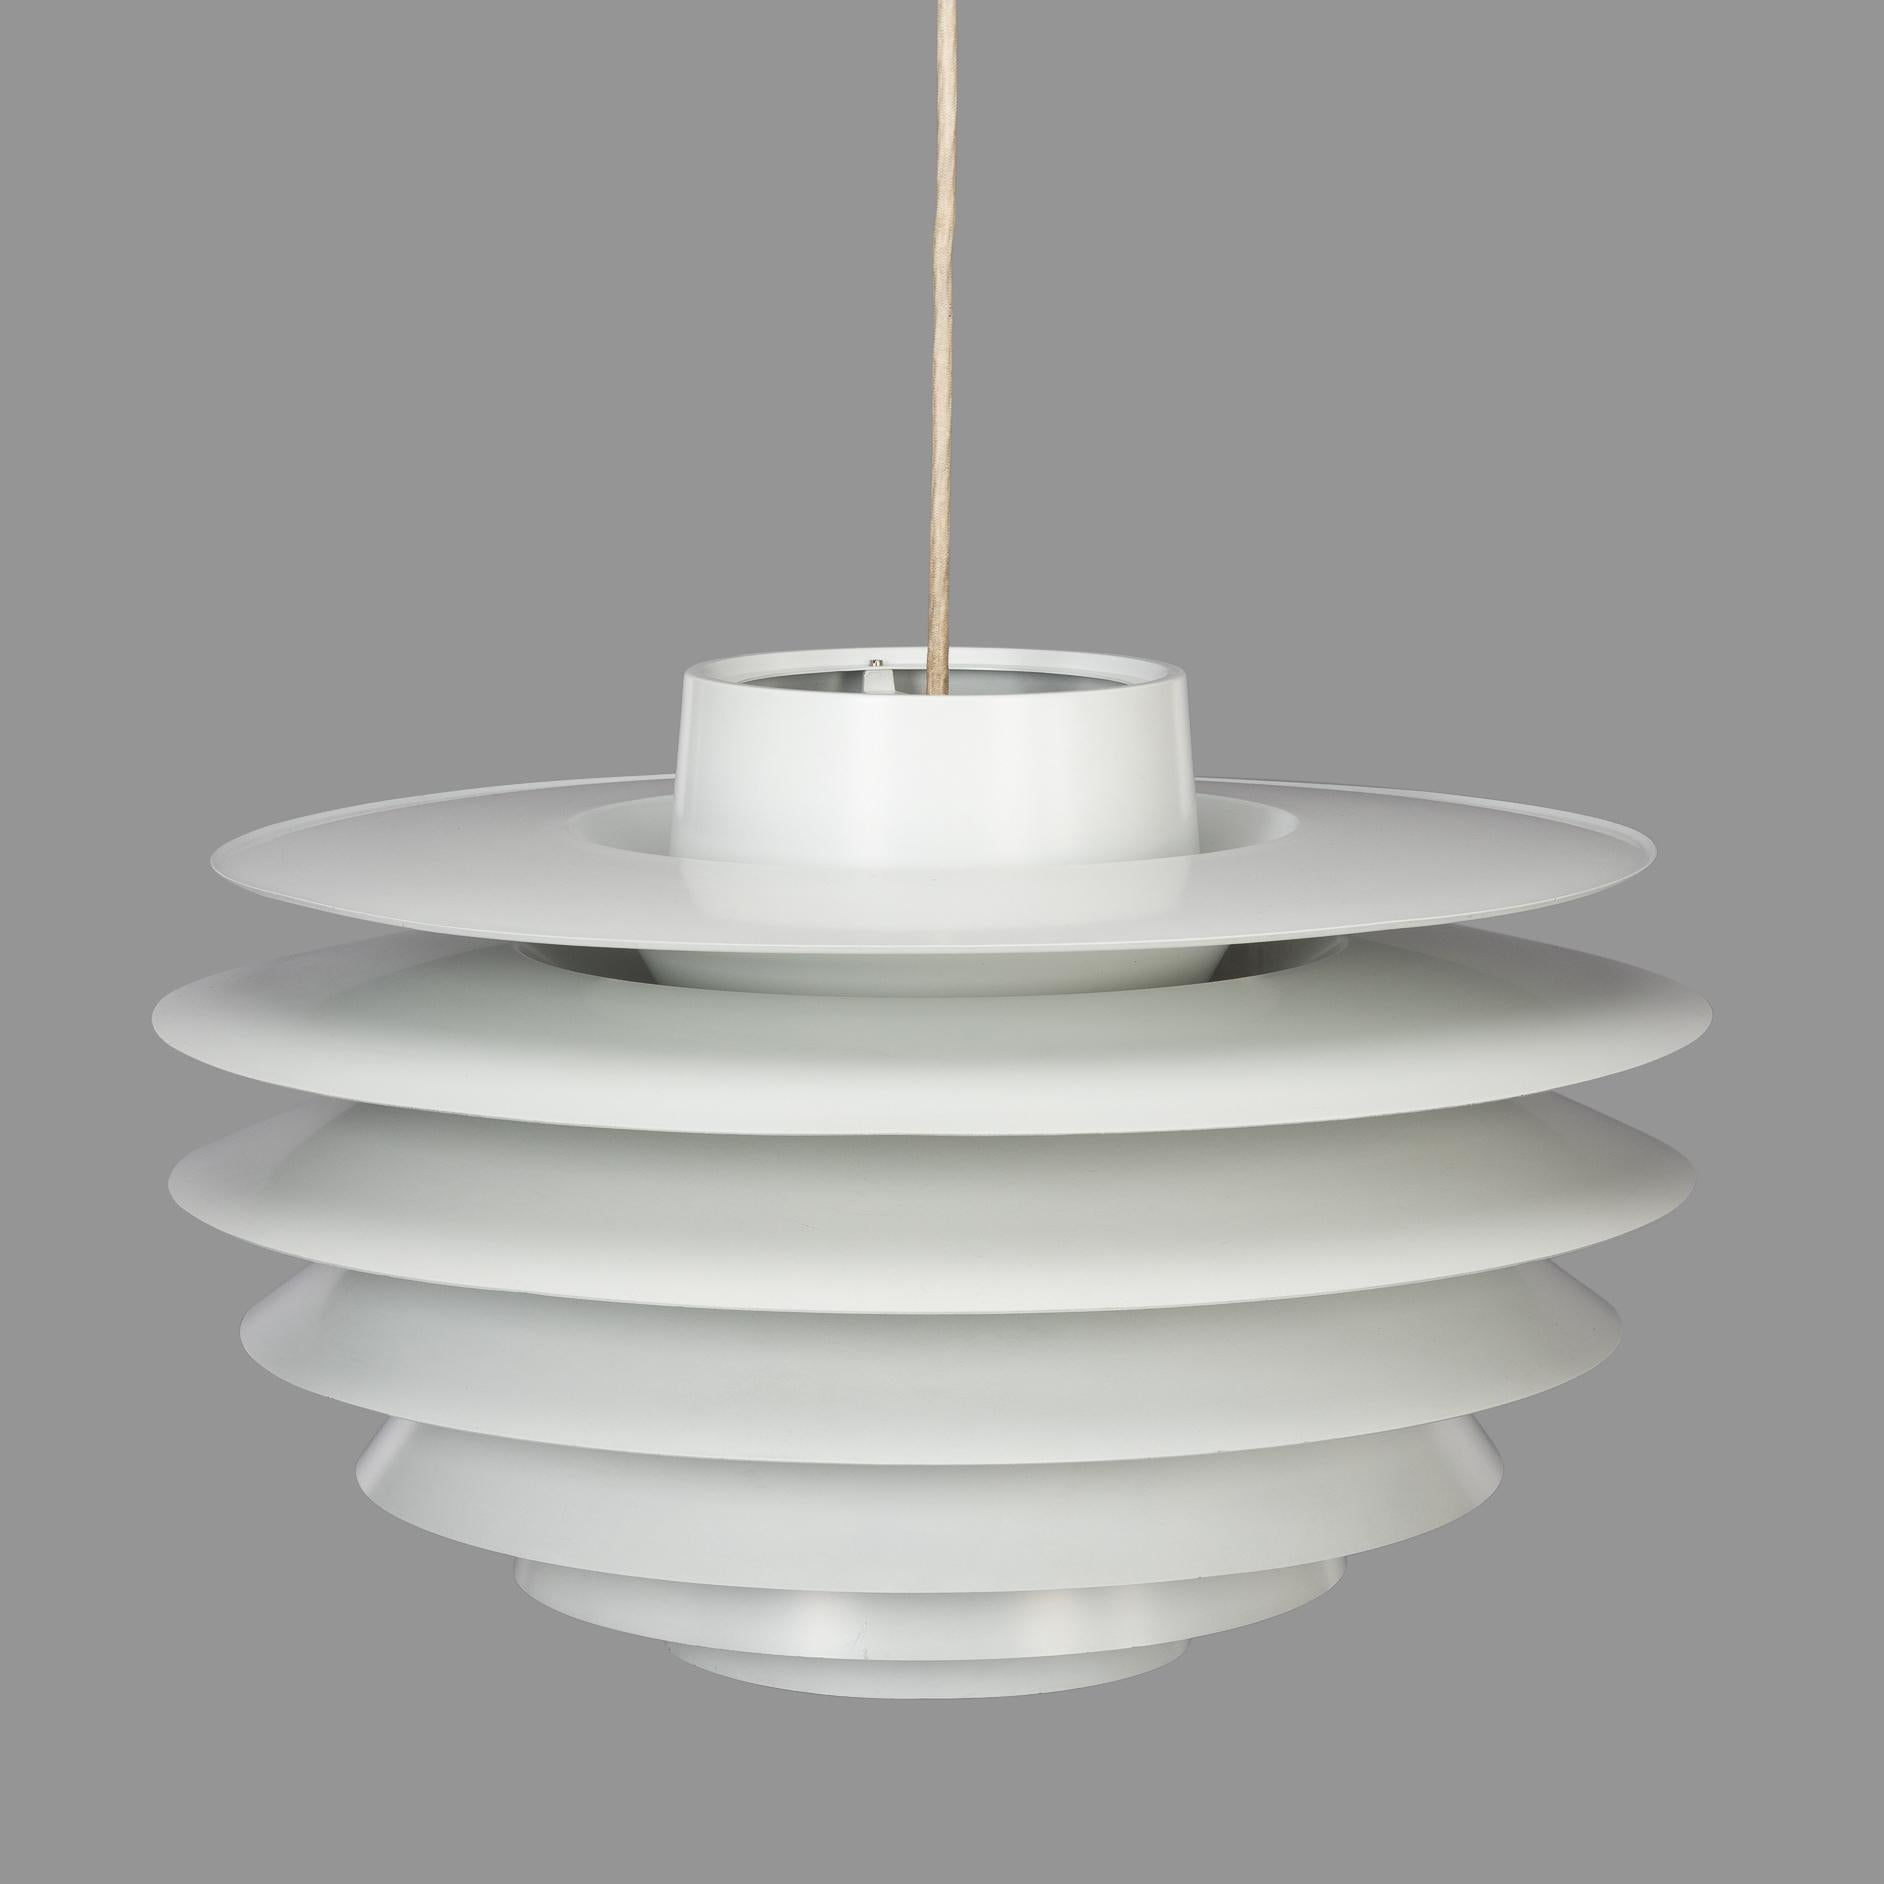 Massively sized Verona pendant lamp in soft white colour designed by Svend Middelboe for Nordisk Solar in the 60s. A huge but still elegant pendant lamp for spacious quarters. This lamp is designed for big open spaces. It brings excellence to